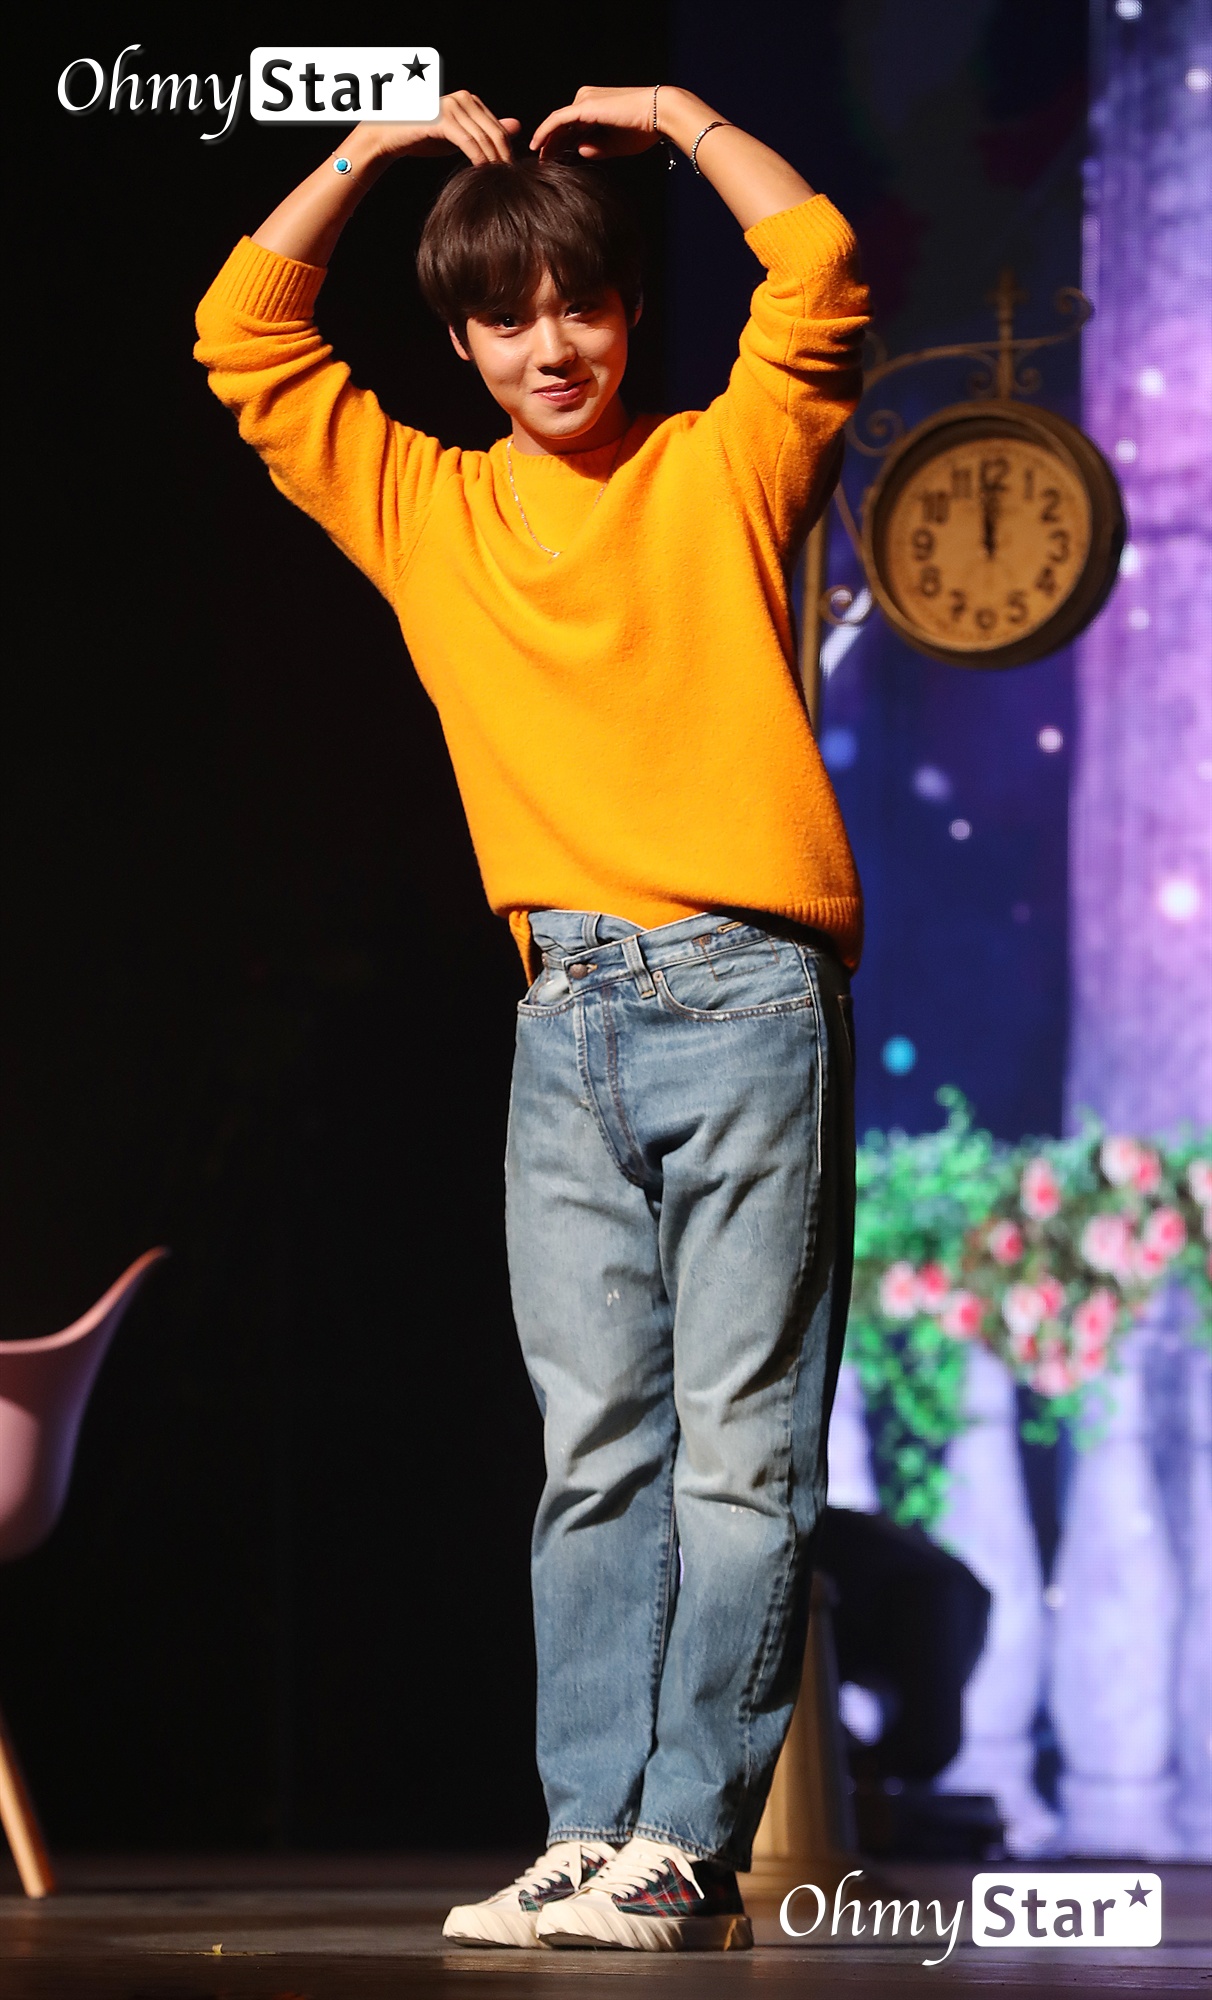 On the 26th, a Showcase commemorating the release of Park Jihoons first solo album OCLOCK was held at Sangmyung University Hall in Hongji-dong, Seoul.Park Jihoon, who came to the big stage alone, said, I feel like making my debut again. I am excited about how you will look at the prepared stage.Park Jihoons first solo album title OCLOCK was written with the heart of I hope that all the moments of solo activity will be remembered specially.Love is the main theme, filled with feelings such as innocence, joy, and passion.The title song L.O.V.E, which contains the sincere confession of a pure man, The beginning of..., US, which is a charming combination of sweet lyrics, Would you, a hip-hop track that expresses love feelings, and Pop R & BPark Jihoon said, It was a song that Dae-Hwi wrote a good song and was released first at a fan meeting. Producer Lee Dae-Hwi has a certain style.Park Jihoon said of the album, My satisfaction is 9 out of 10, and I am quite satisfied.Although the public is interested in solo activities because of the popularity of Wanna One, Park Jihoon said, I wanted to meet you as soon as possible than the burden and worry. I wanted to fill the expectations of fans who would wonder what I was doing.This album has a bigger goal to show a variety of things than grades, he said. I want to show you that I can do well alone.Is it because of the desire for transformation? Solo singer Park Jihoon put a wonderful and mysterious figure on the front rather than loving.It is different from Wanna One Park Jihoon, who has a cute and lovely image, represented by the nicknames Stormman and Winging (Wink + Baby).Park Jihoon said, I wanted to show a lot of cute things through Wanna One activities, so I wanted to show a serious and wonderful appearance this time.Park Jihoons first solo mini album OCLOCK was released on each music site at 6 pm on the 26th, and it starts full-scale activities starting with the Showcase held on the same day.Park Jihoons solo mini album OCLOCK release Showcase